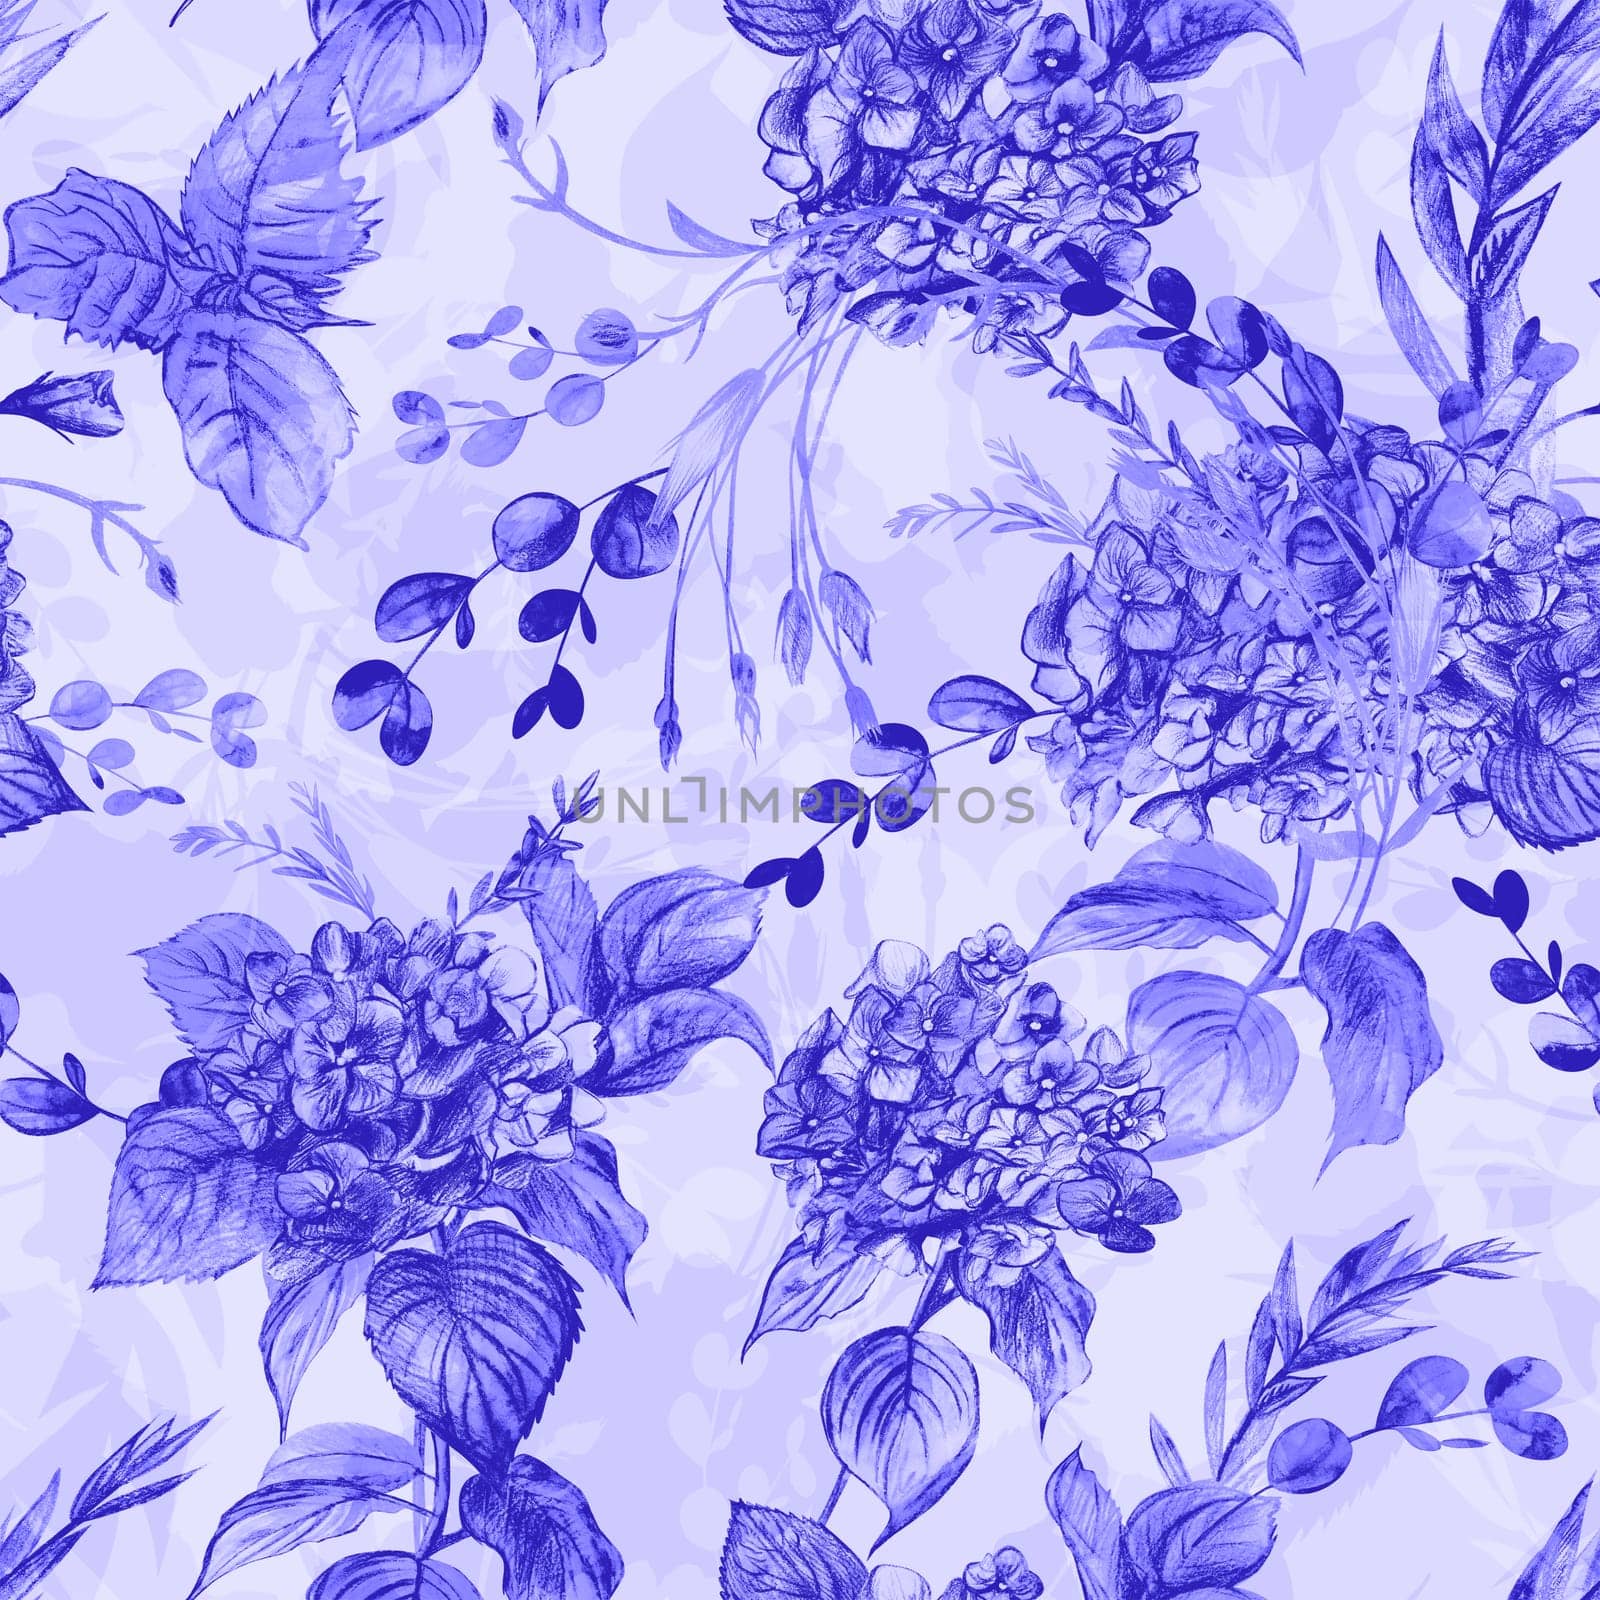 Seamless pattern with hydrangea and herb flowers in blue monochrome shades by MarinaVoyush